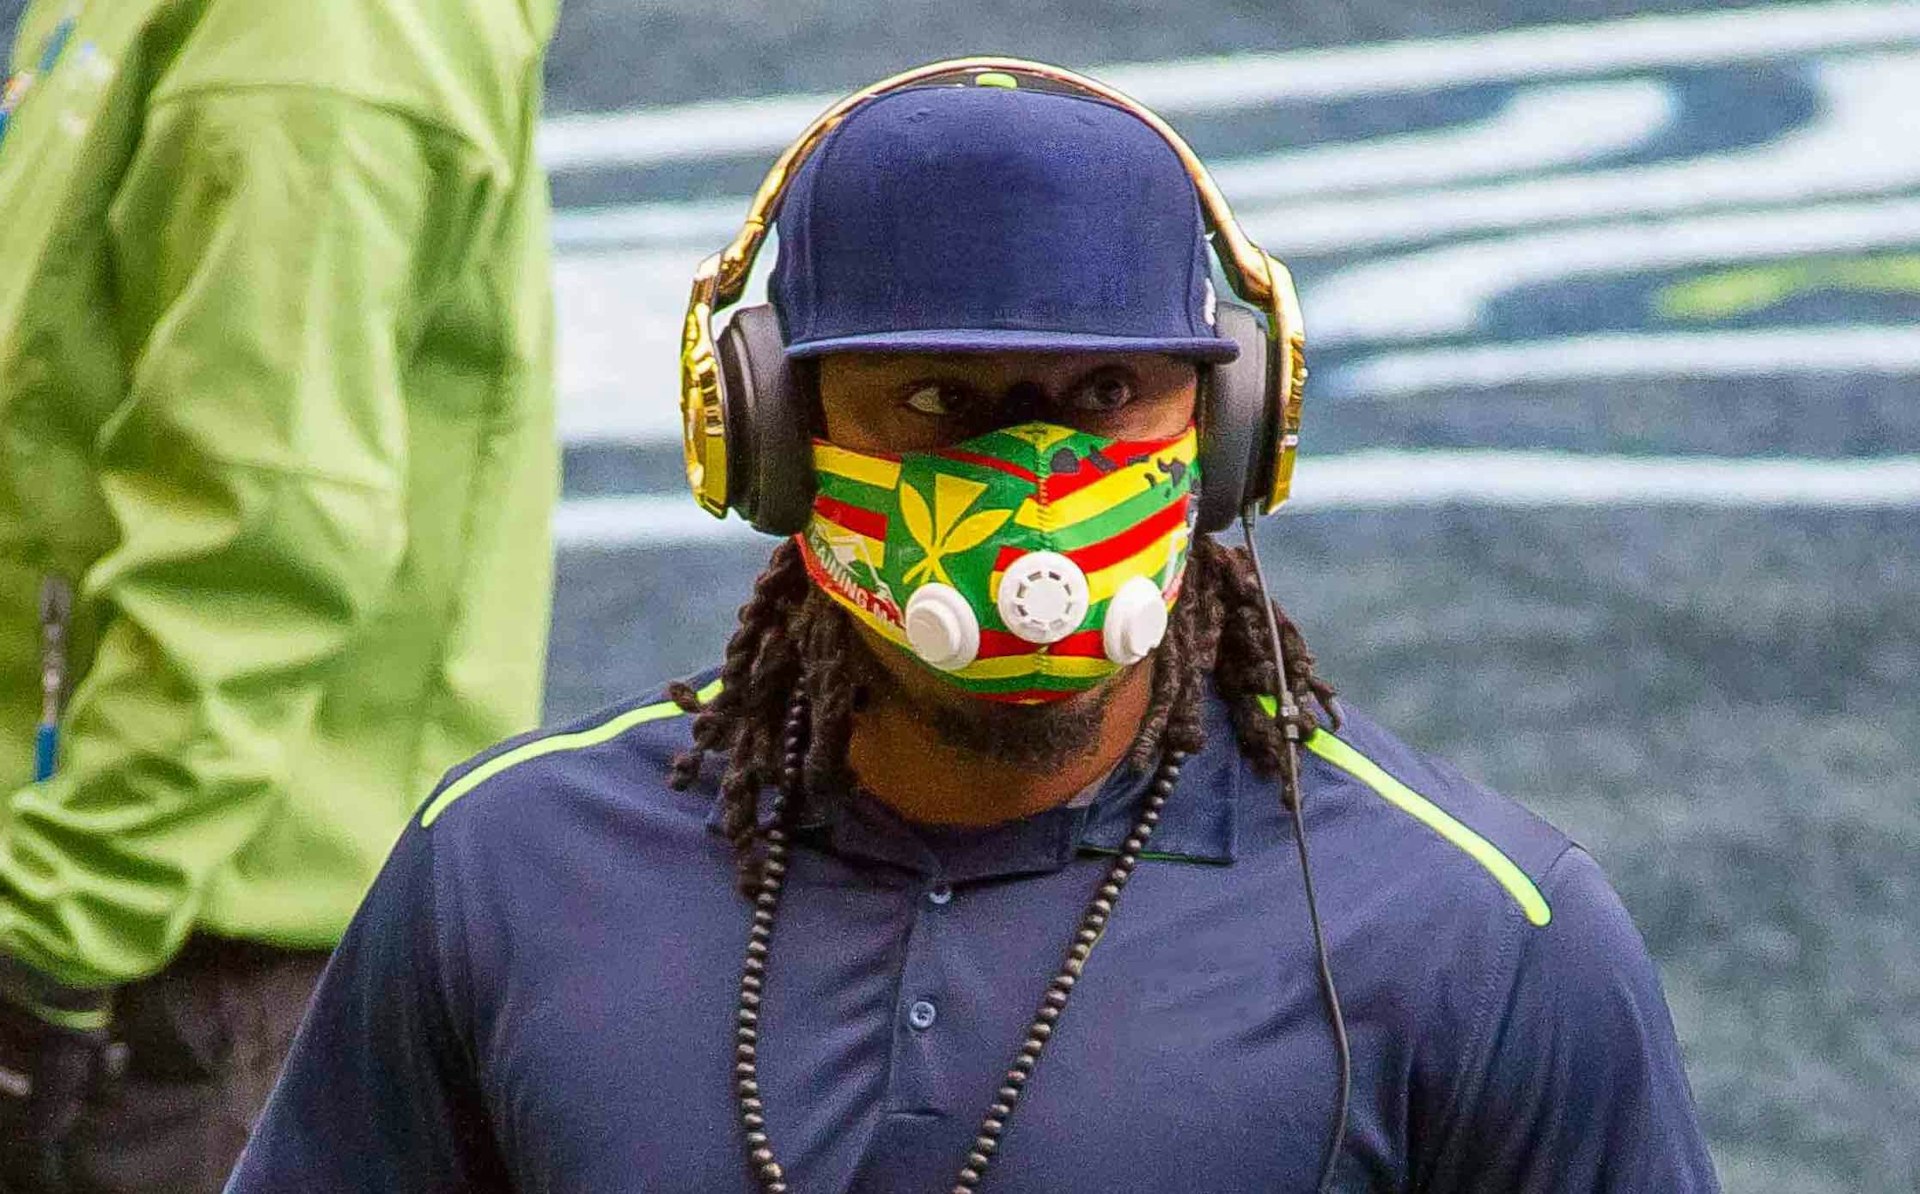 The quiet resistance of NFL Star Marshawn Lynch